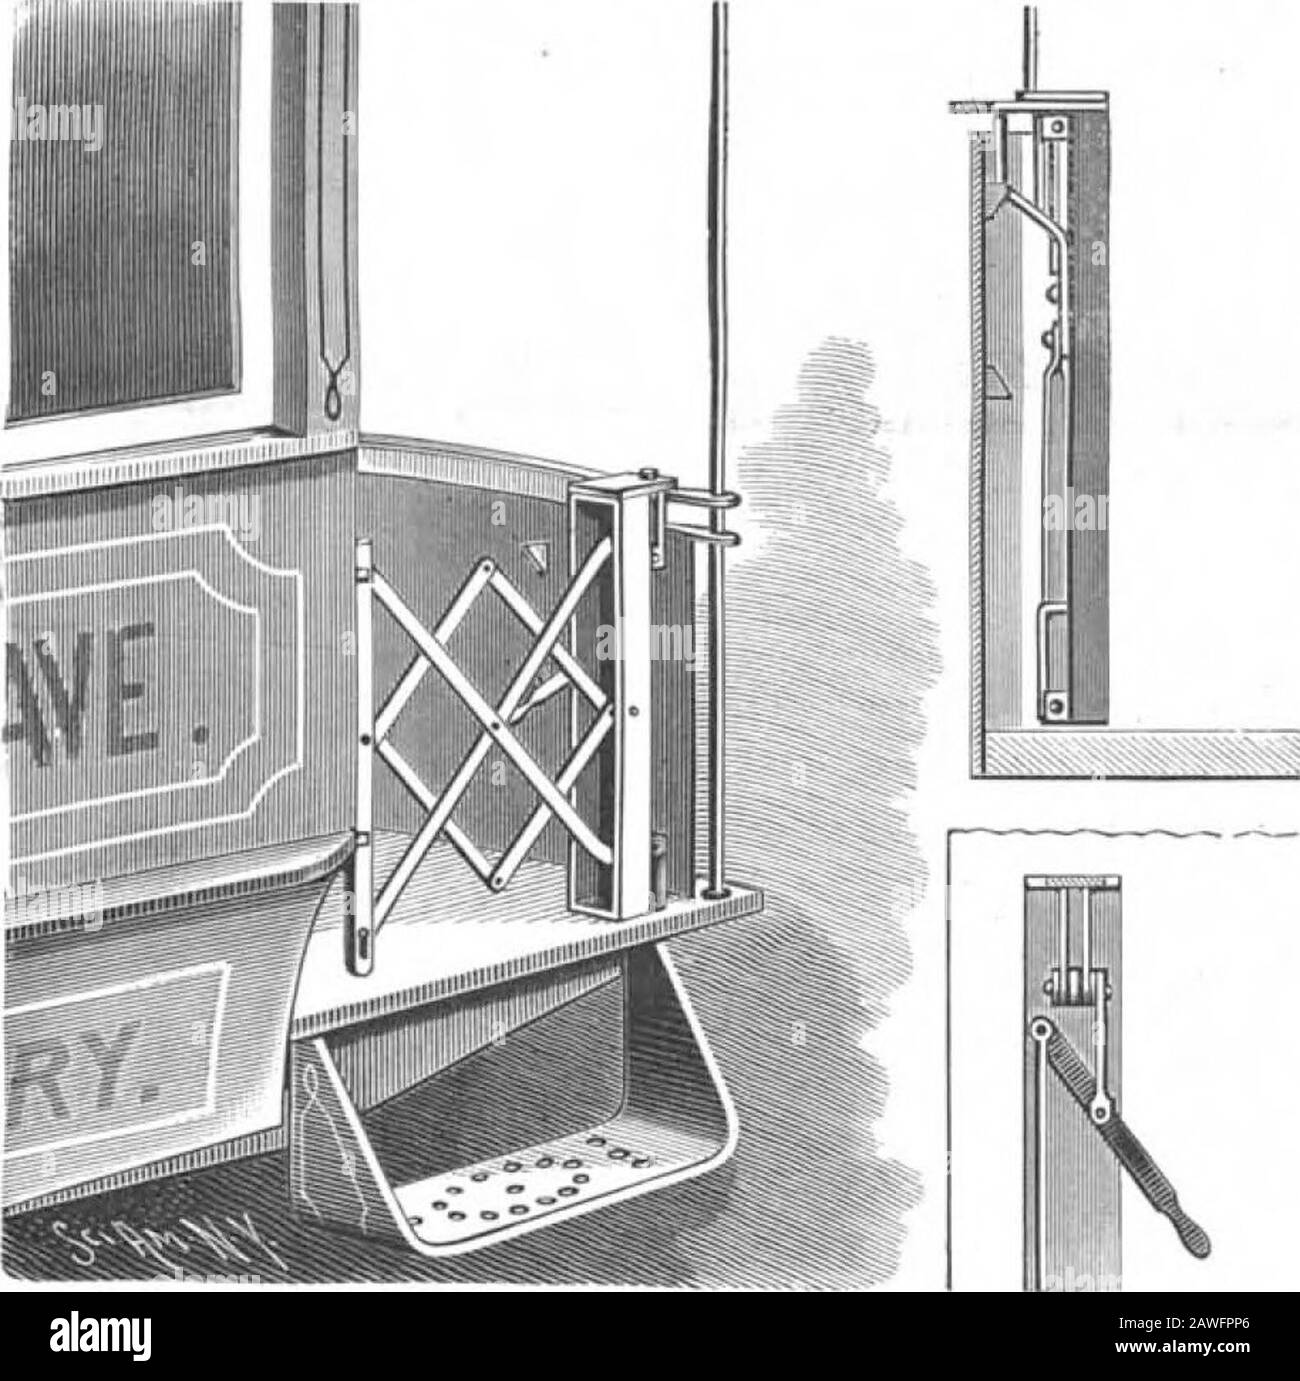 Scientific American Volume 71 Number 14 (October 1894) . hter.—P. F. Johnson. A FLATFOBM GATE FOB CABS, ETC.The gate shown in the illustration is of exceedinglysimple construction, easily operated and readily lockedin either open or closed position. It has been pat-ented by Mr. Frederick W. Young, of No. 9 Hill Street,Bloomfield, N. J. It has a post-like partly open cas-ing secured to the car platform and the dashboard atone side of the latter, and in the sides of this casingnear the middle are pivoted two members of a set oflazy-tongs, the other members of the set being pivot-ally connected w Stock Photo